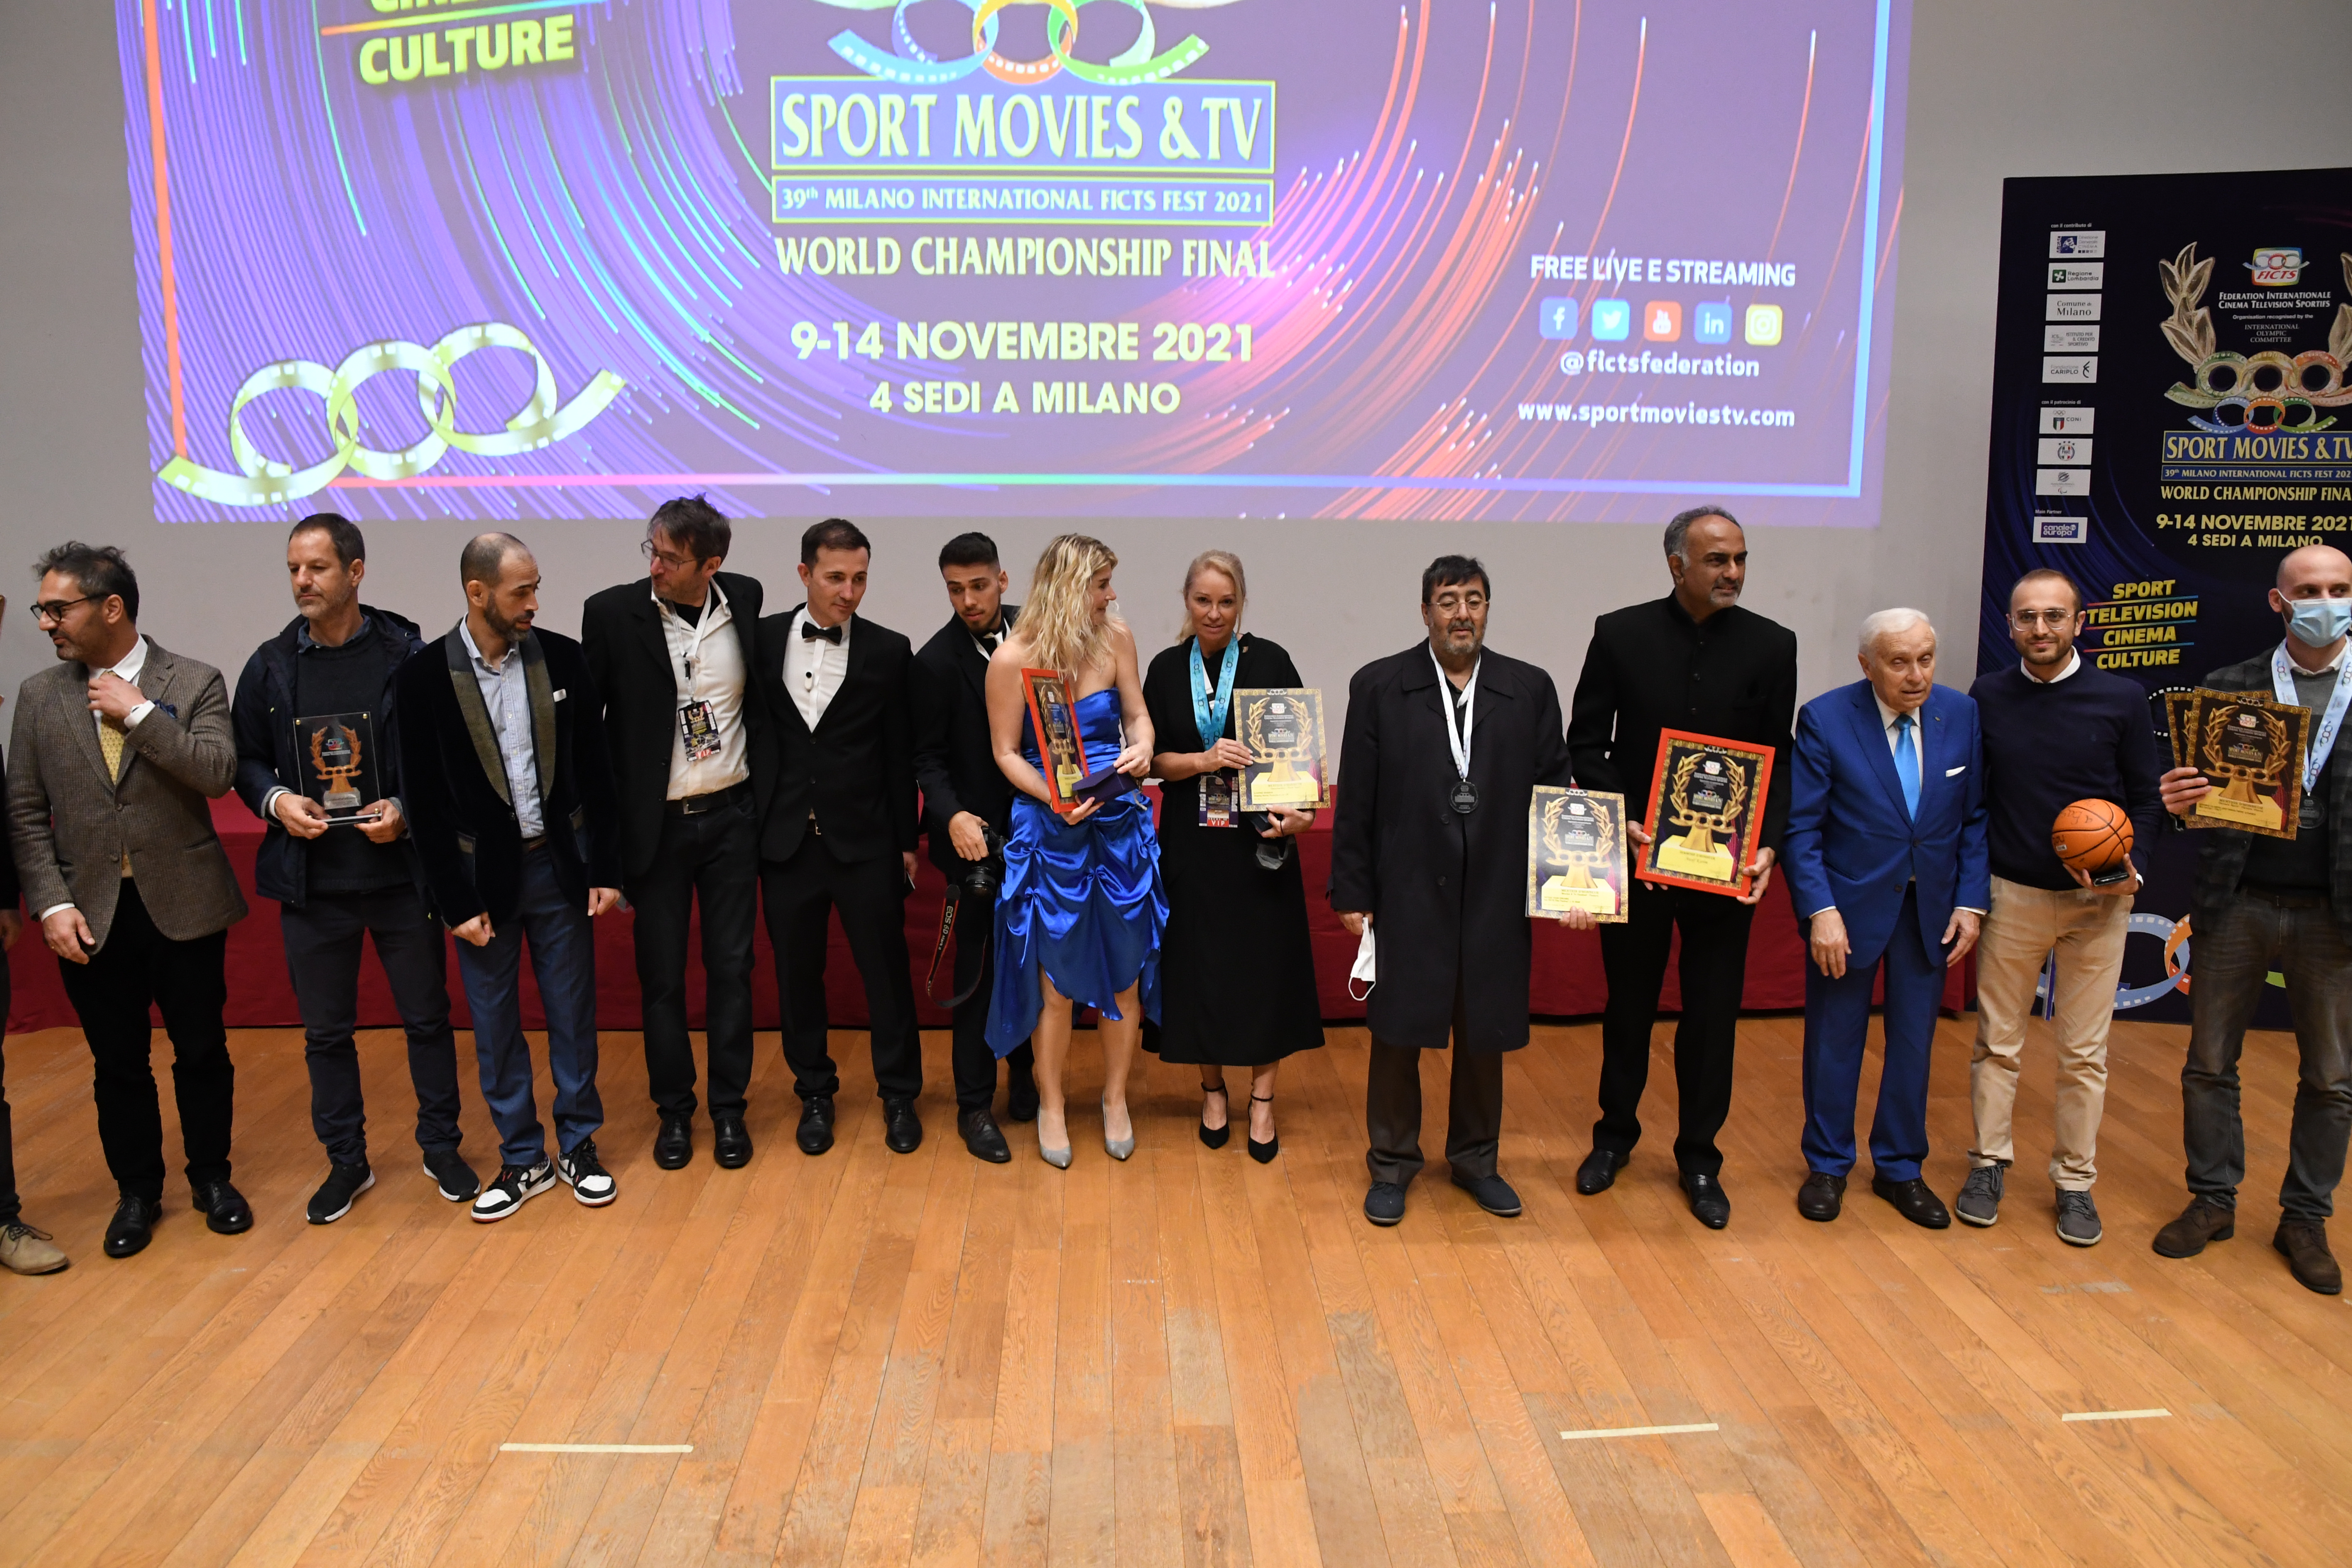 “SPORT MOVIES & TV 2021”: THE WINNERS ARE…